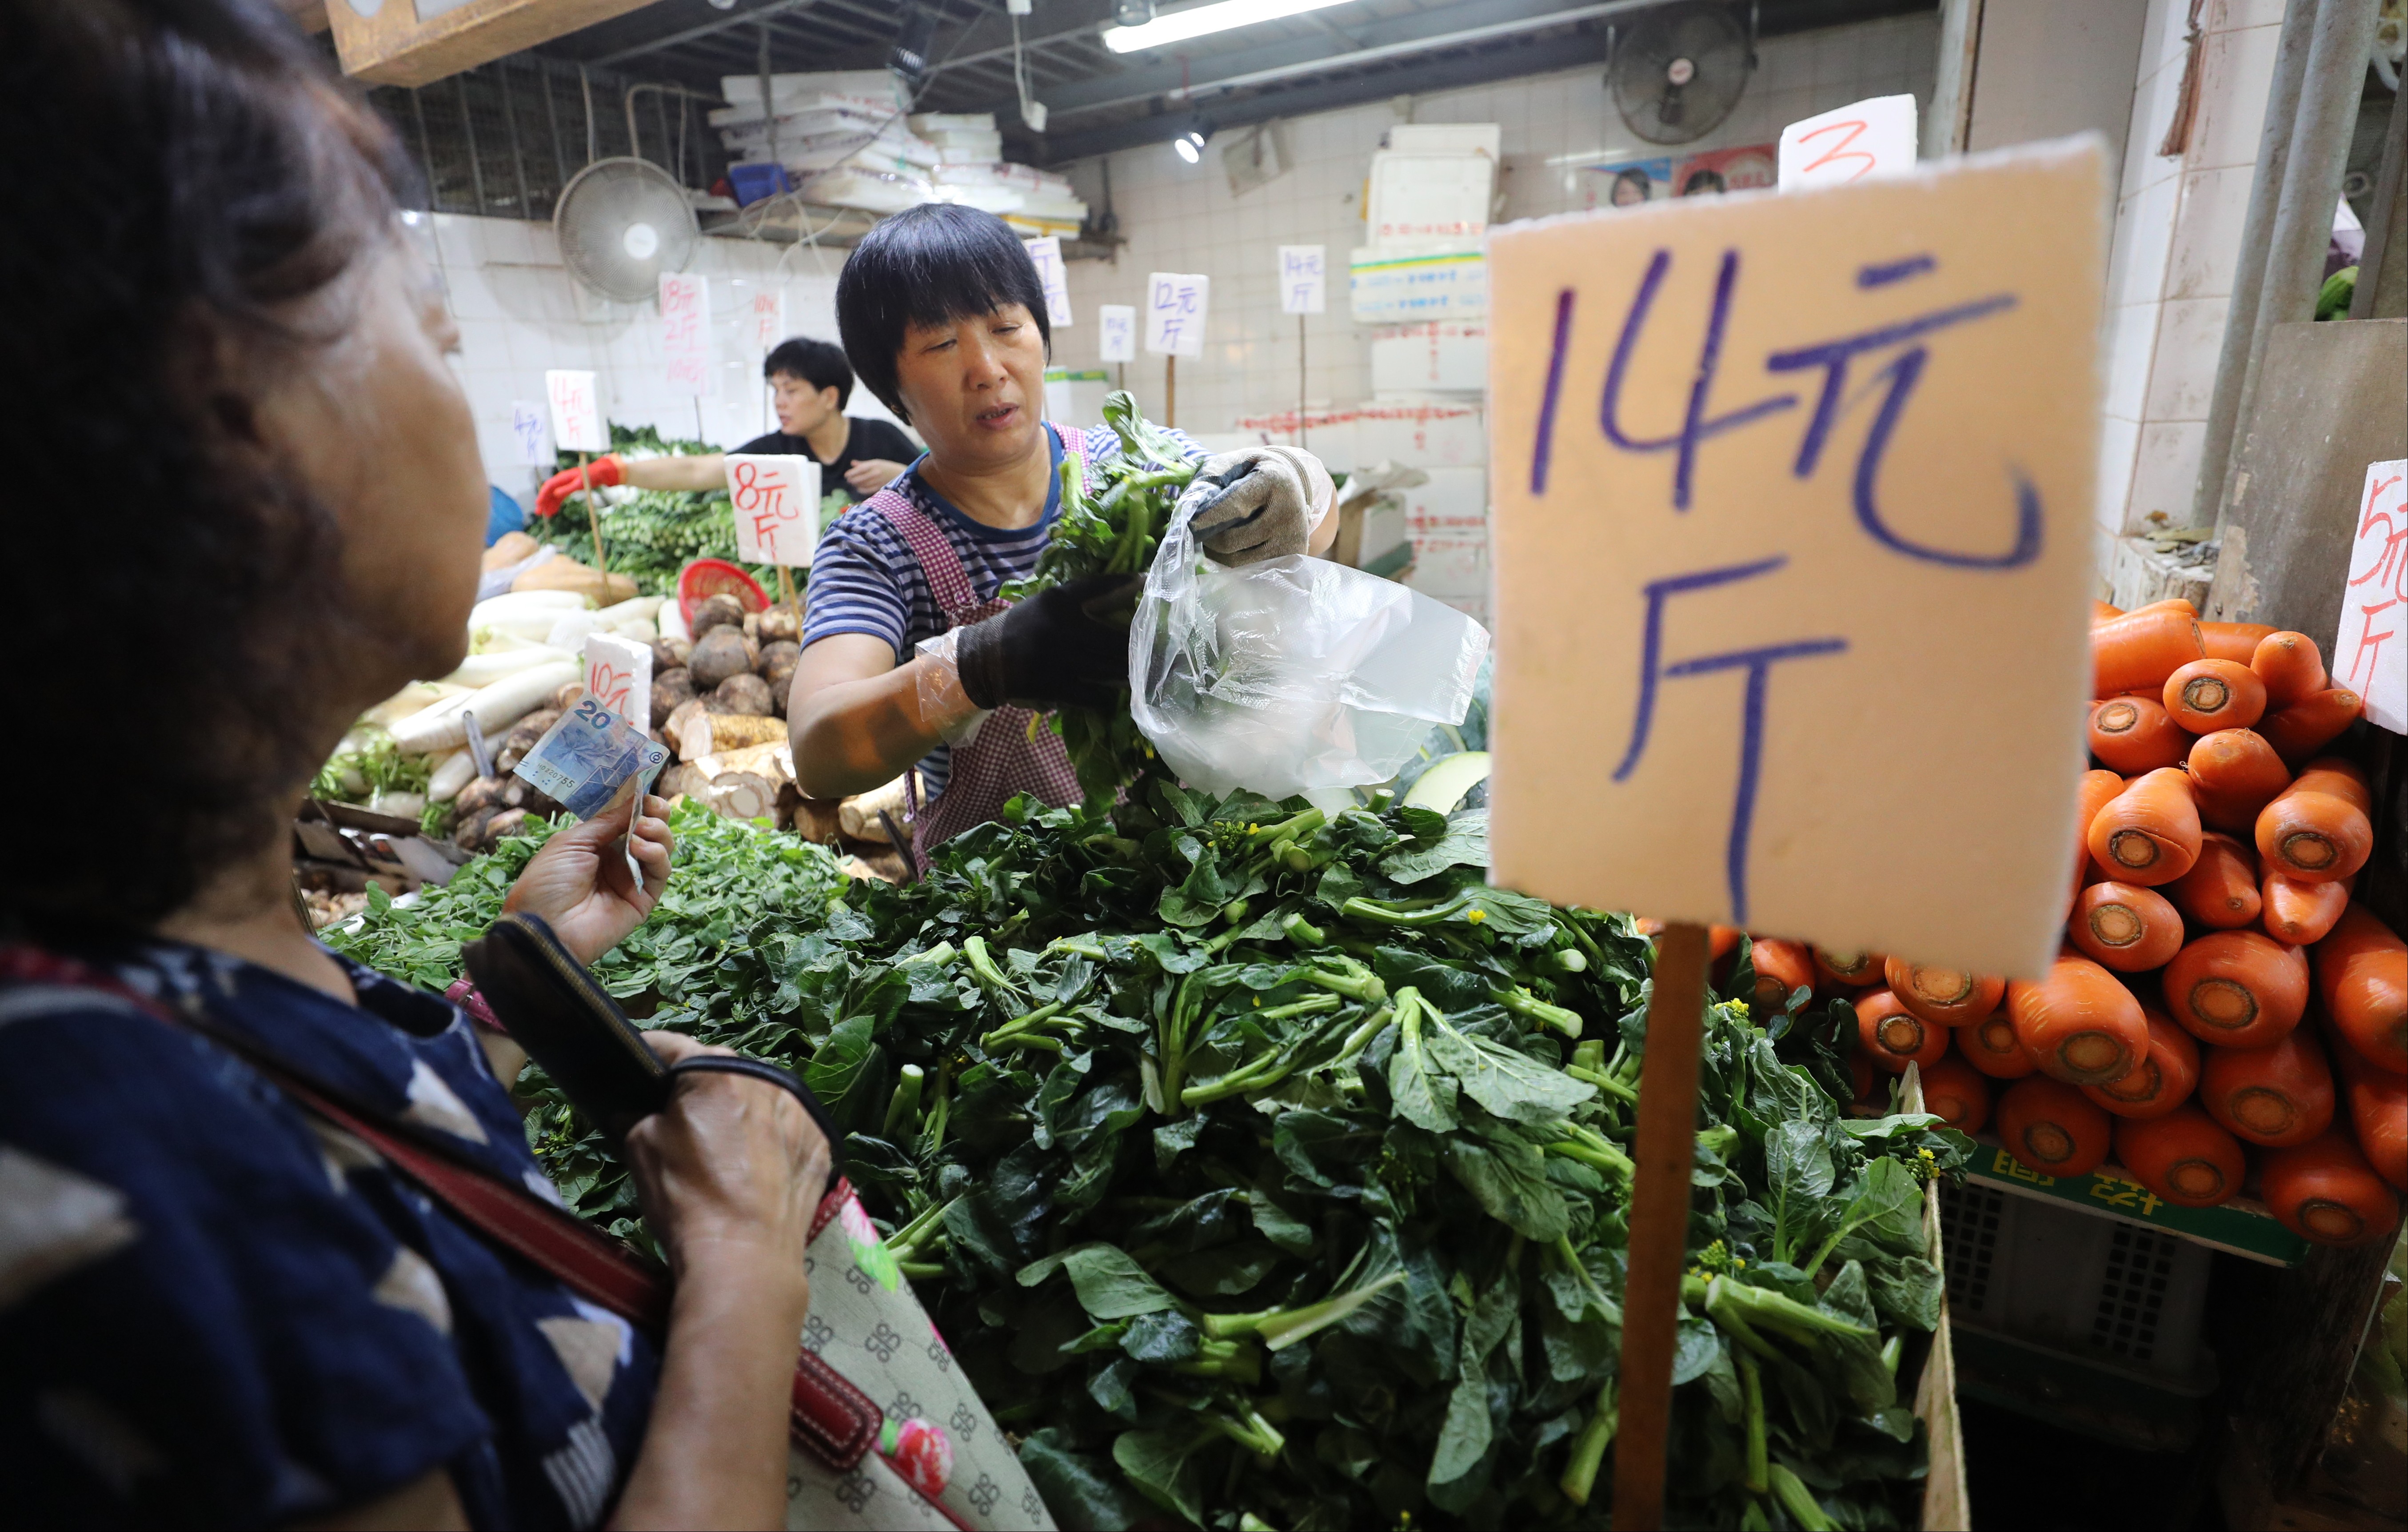 Sales were brisk at Pei Ho Street Market in Sham Shui Po, on September 13, with shoppers stocking up as Typhoon Mangkhut approached. Photo: Winson Wong